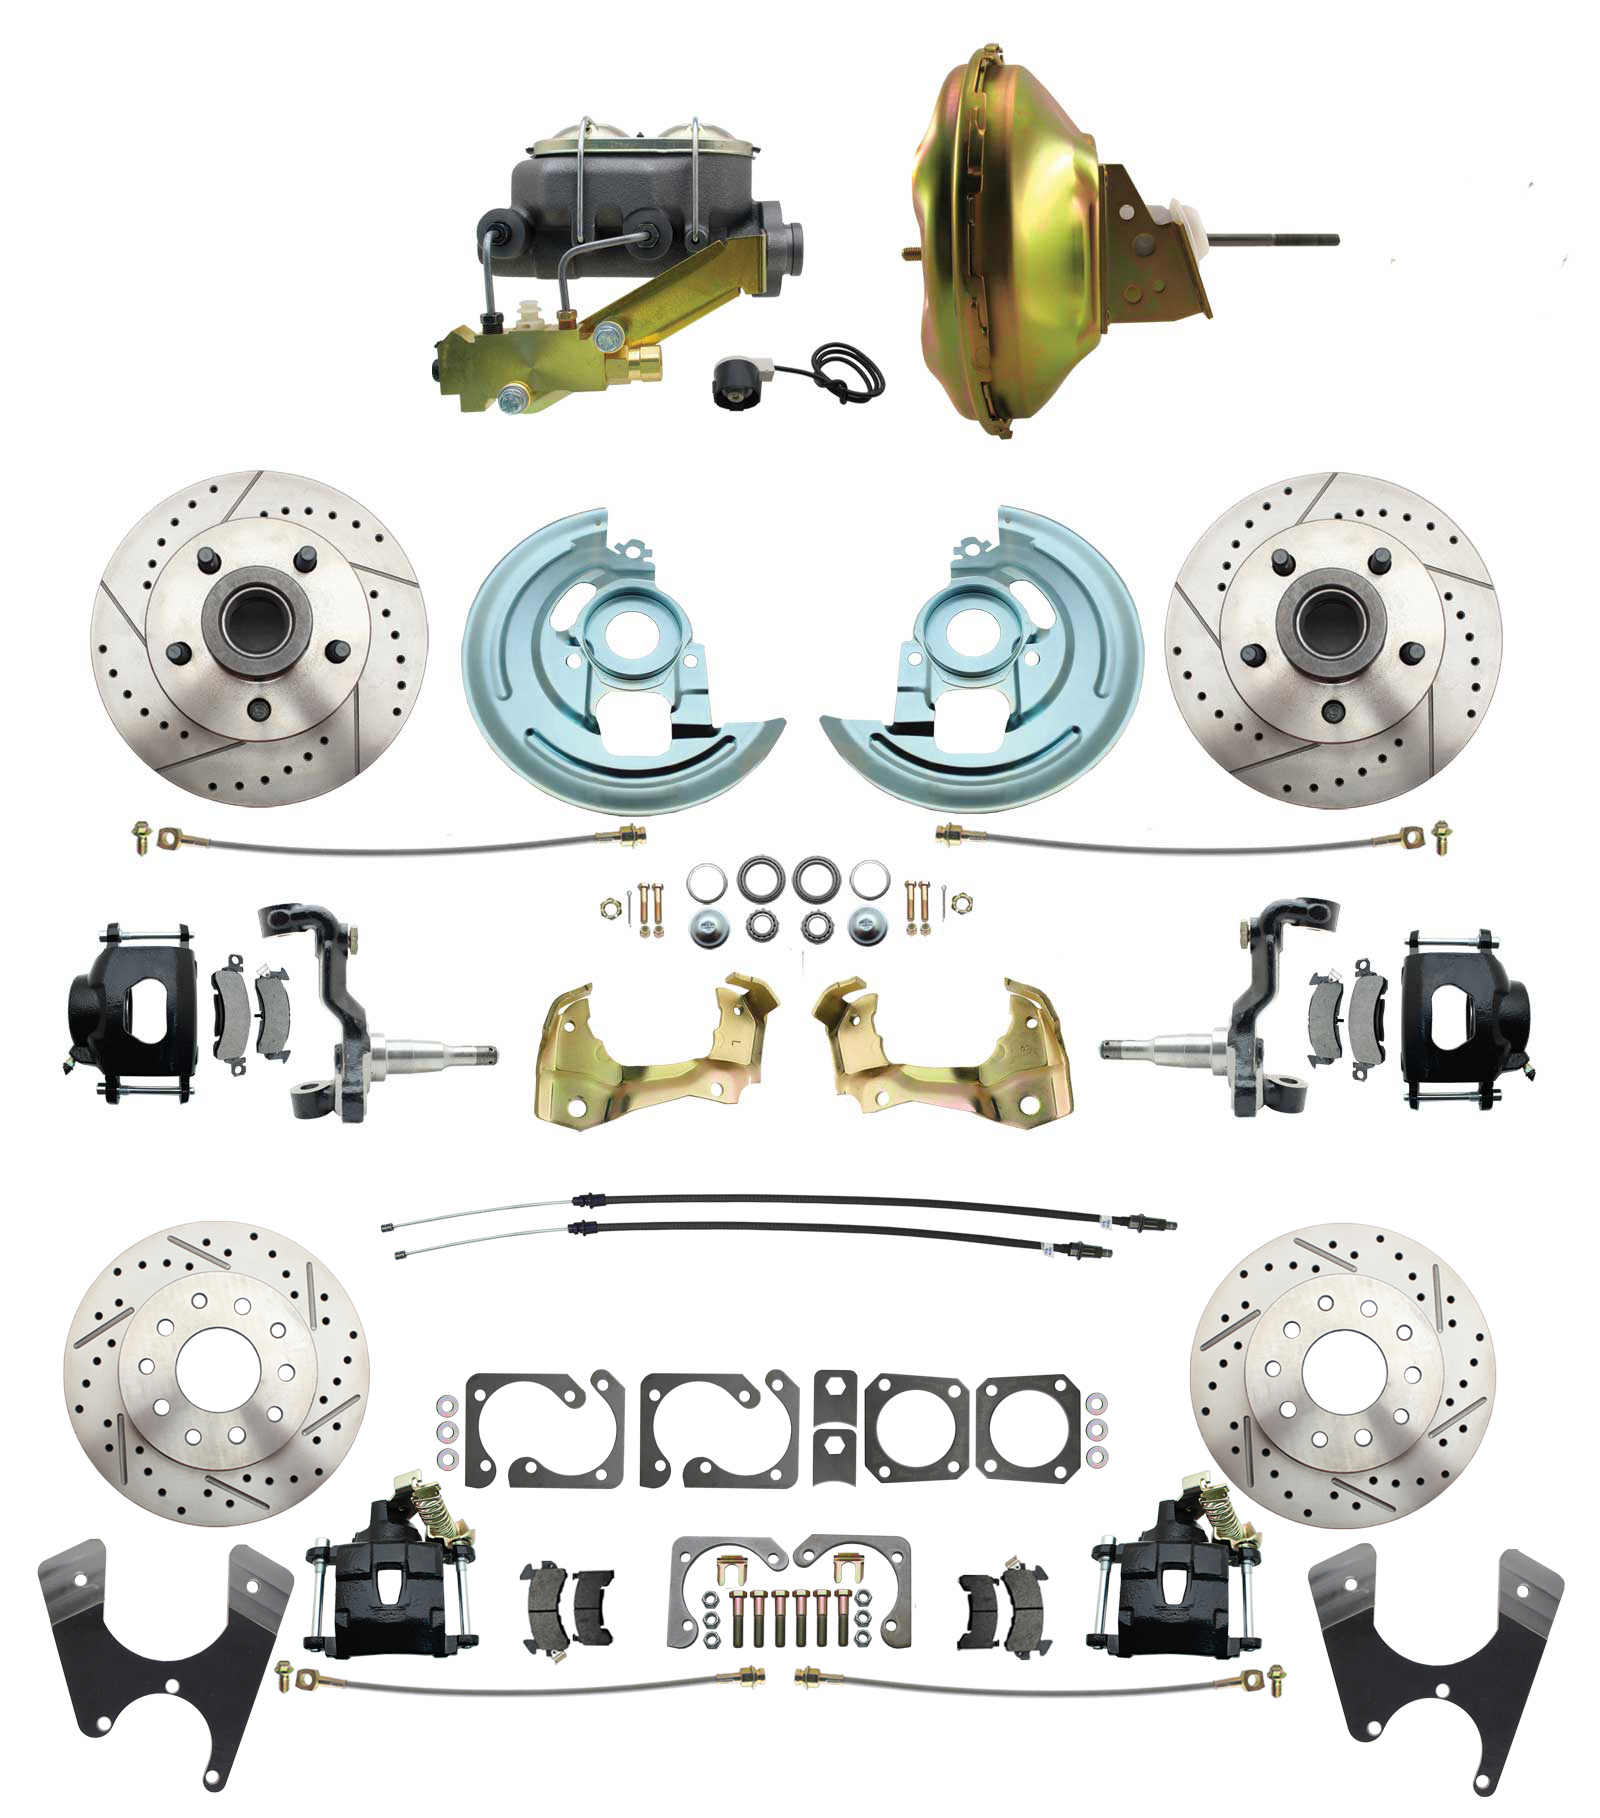 1967-1969 Camaro/ Firebird & 1968-1974 Chevy Nova Front & Rear Power Disc Brake Conversion Kit Drilled & Slotted & Powder Coated Black Calipers Rotors W/ 11Delco Stamped Booster Kit